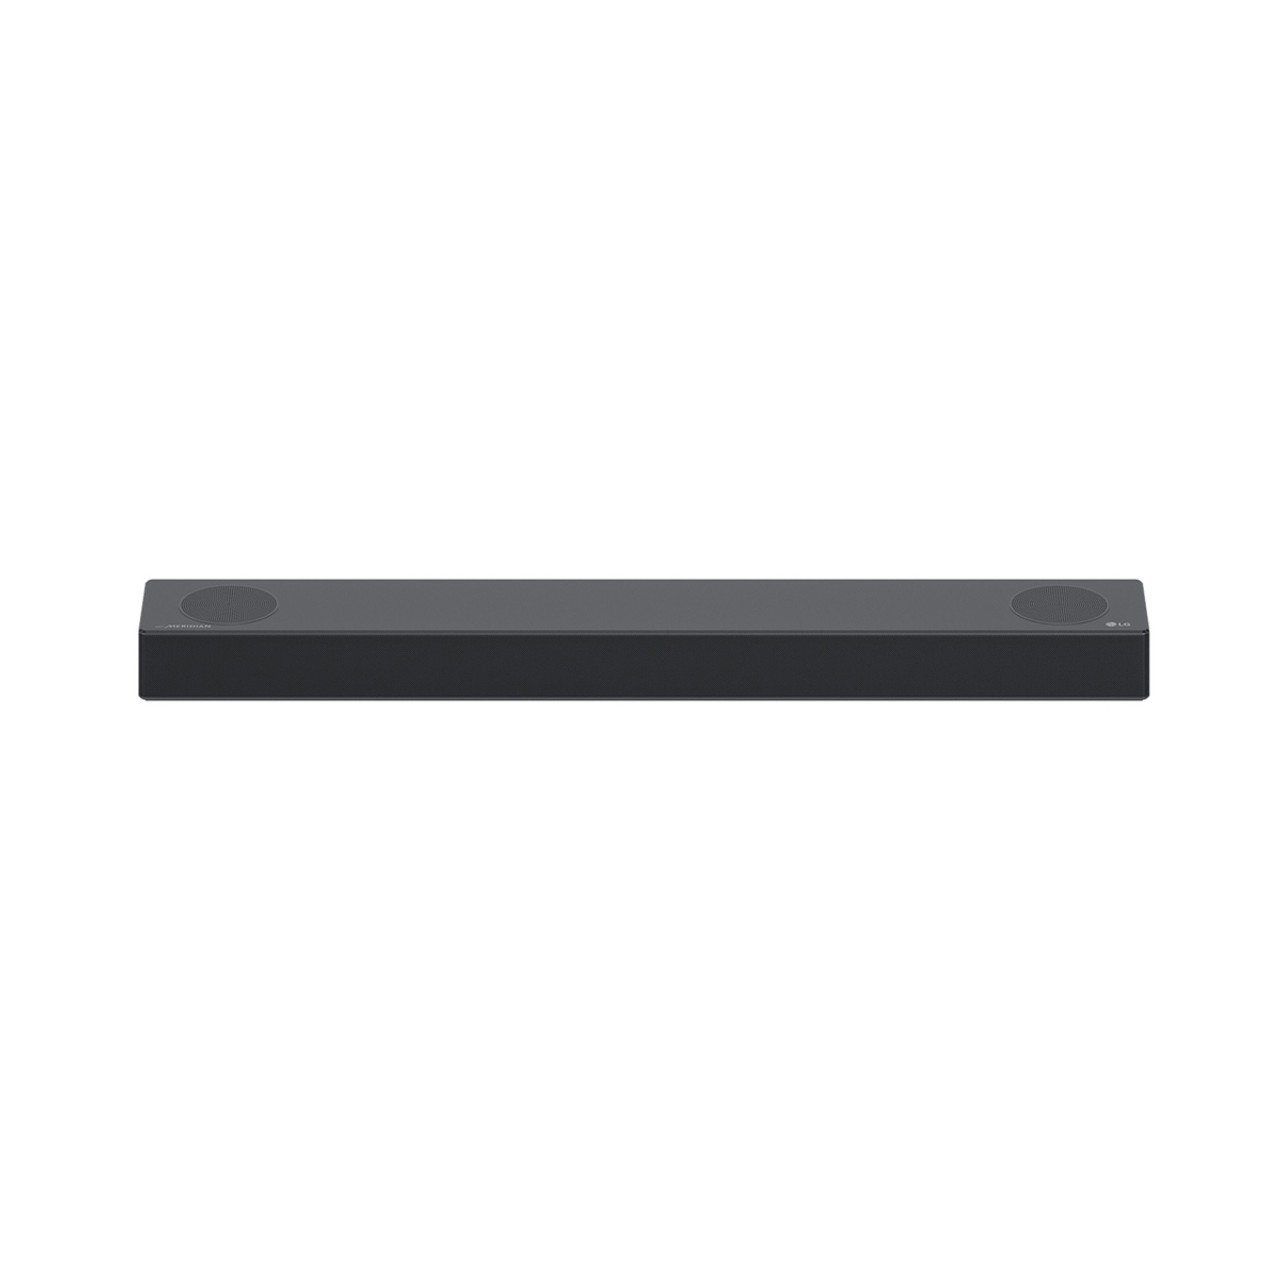 Shop | S75Q 3.1.2 ch High Res Audio Sound Bar with Dolby Atmos